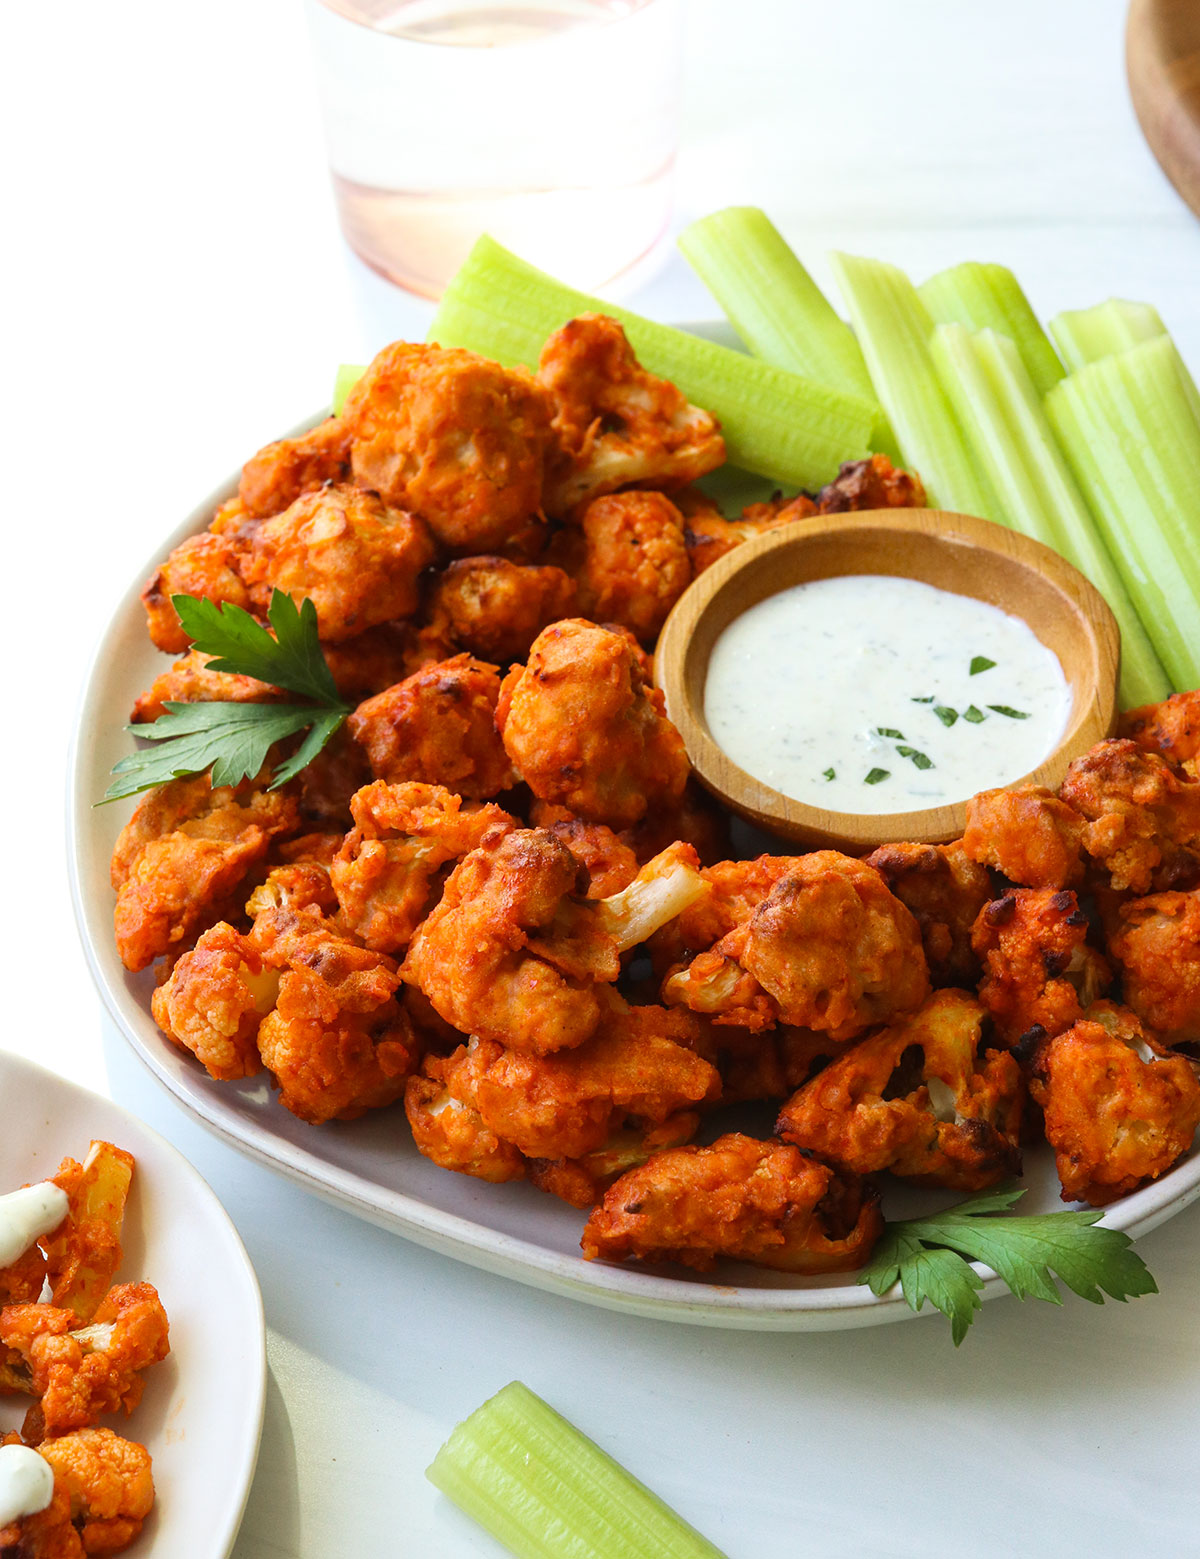 buffalo cauliflower served on a white plate with celery and ranch dip.